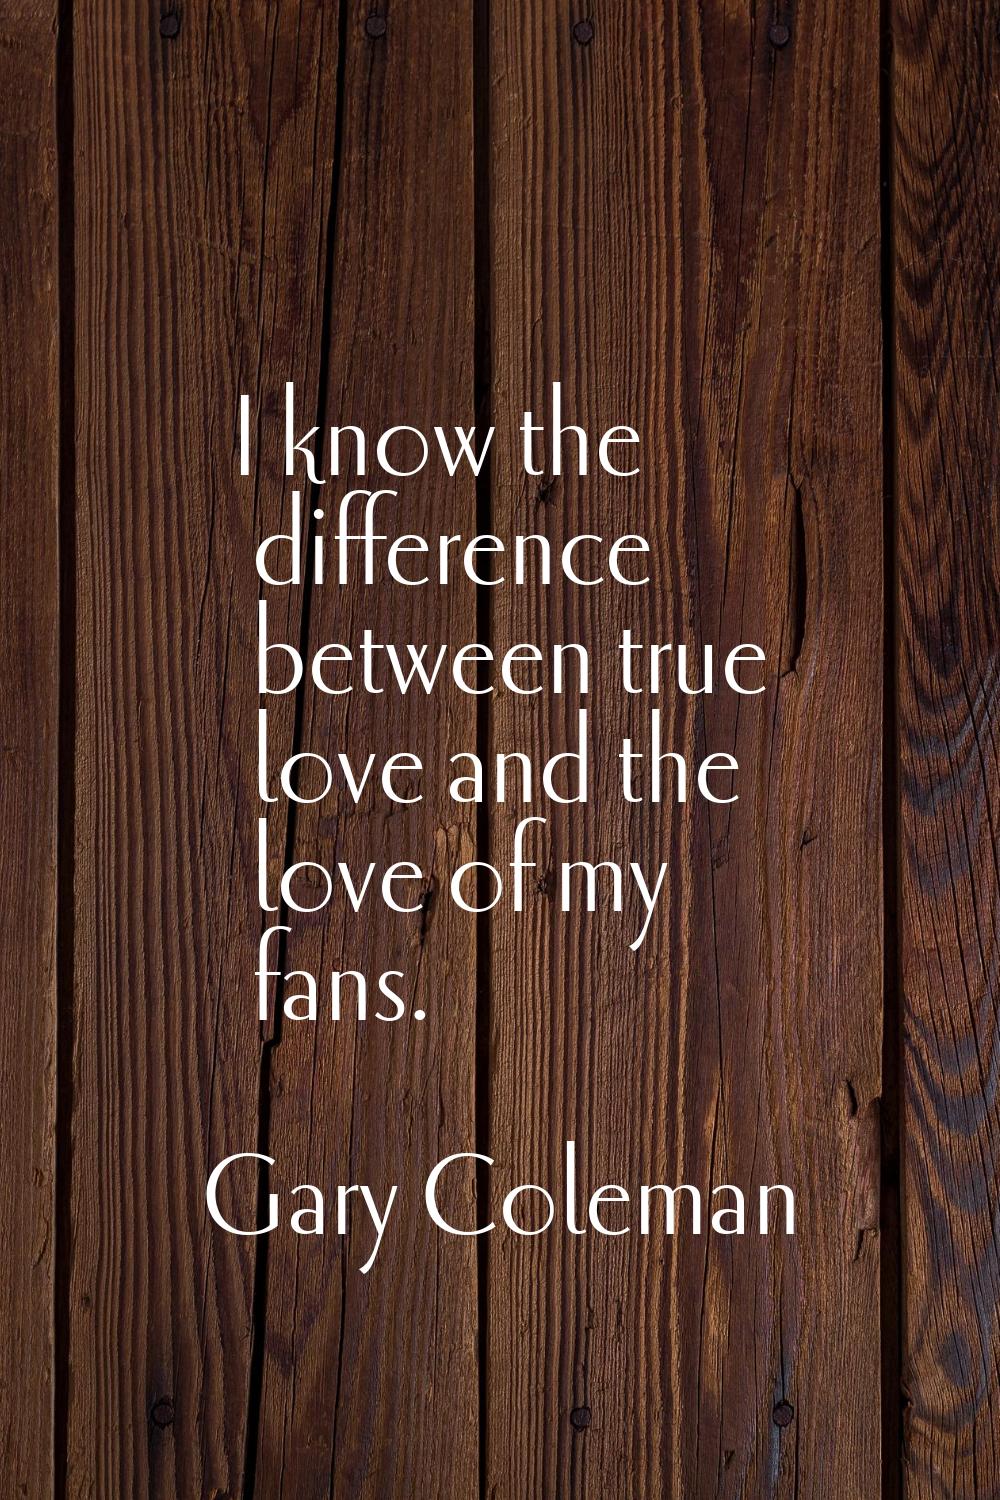 I know the difference between true love and the love of my fans.